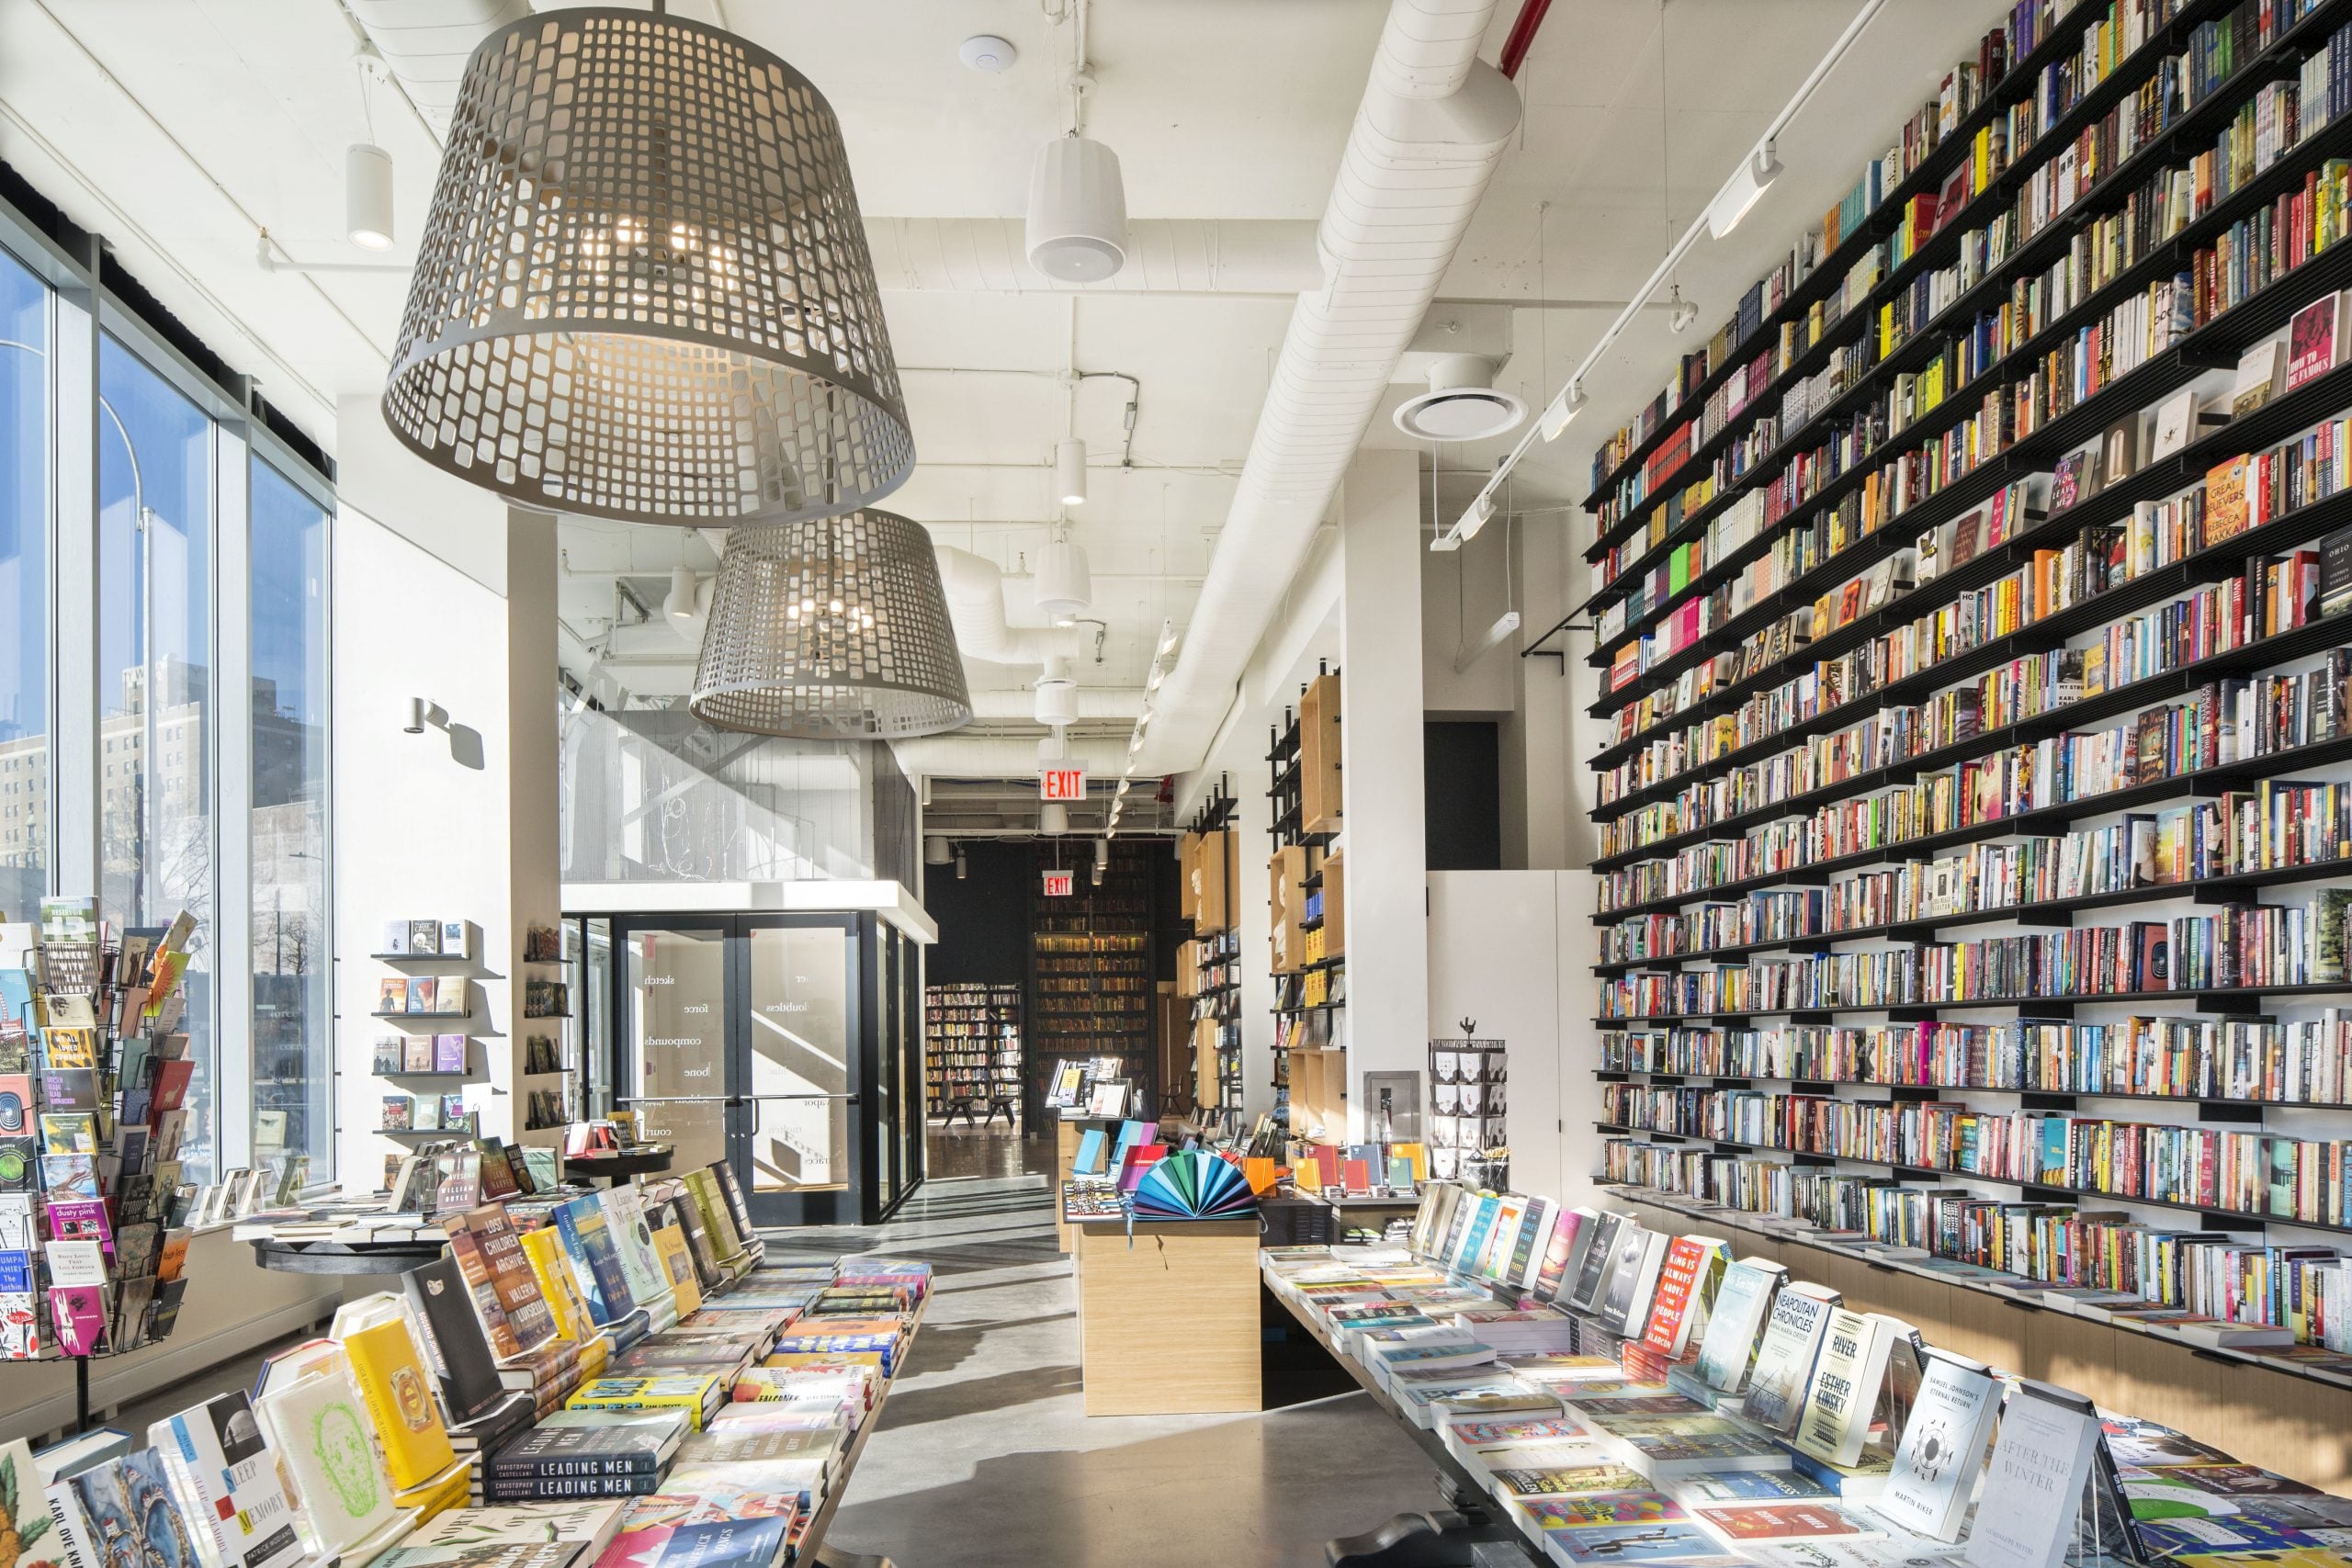 Brooklyns Center For Fiction Rakks Architectural Shelving And Hardware